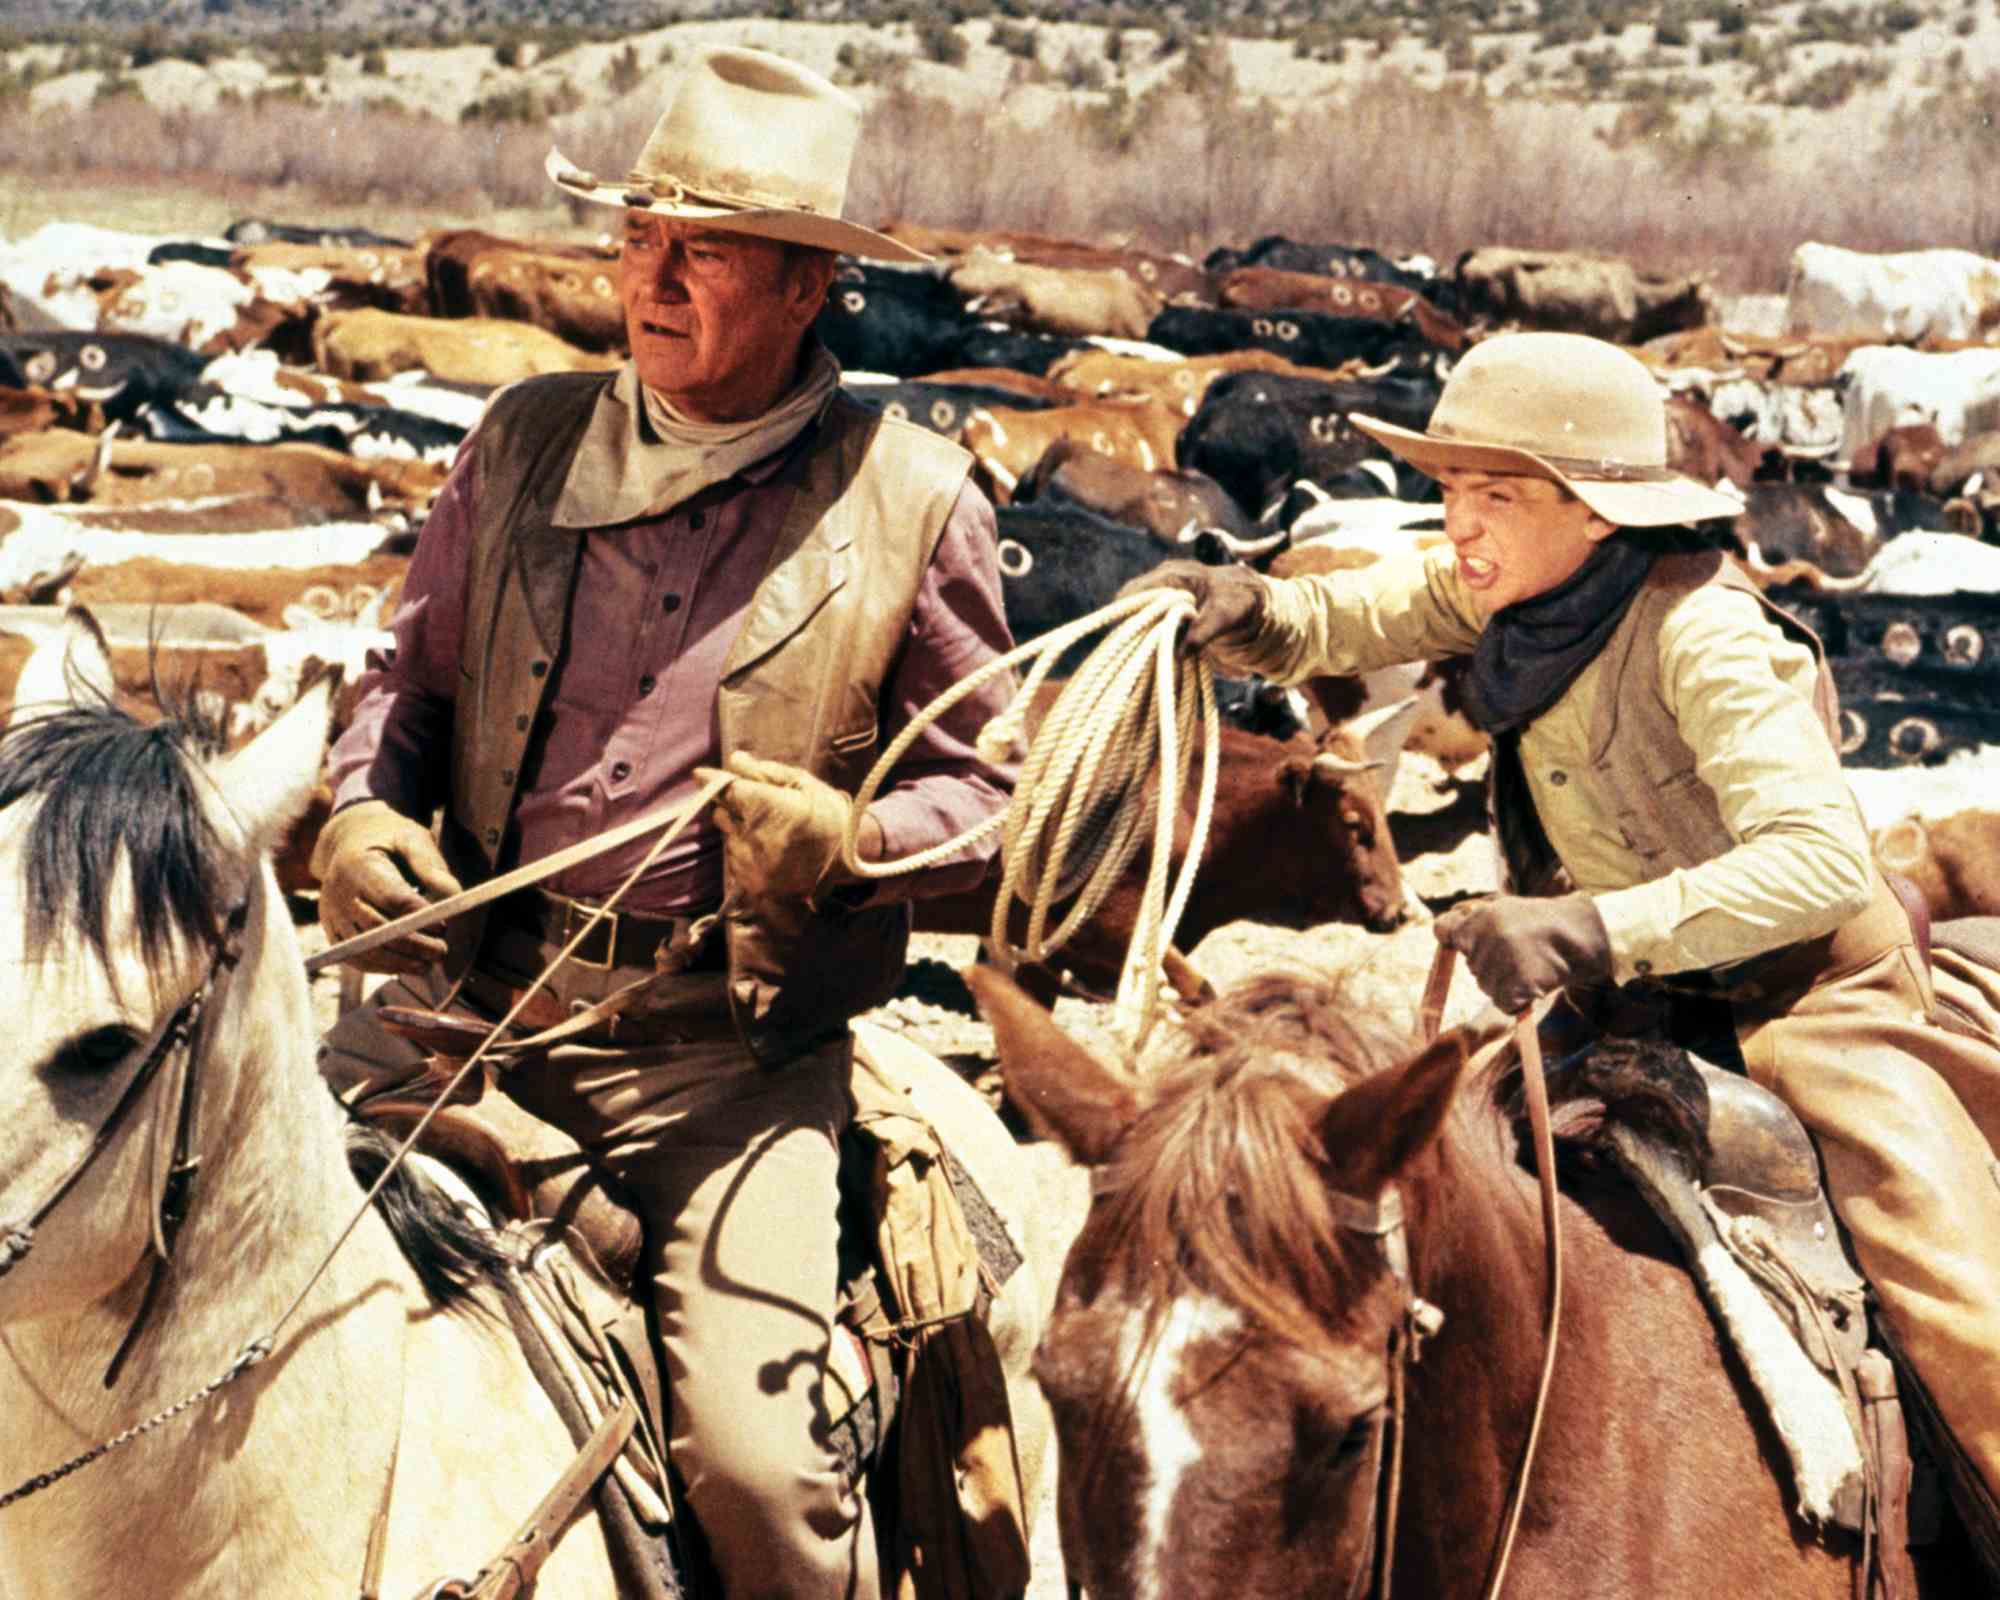 'The Cowboys' John Wayne as Wil Andersen and Sean Kelly as Stuttering Bob - Cowboy riding on horses surrounded by their herd of cattle